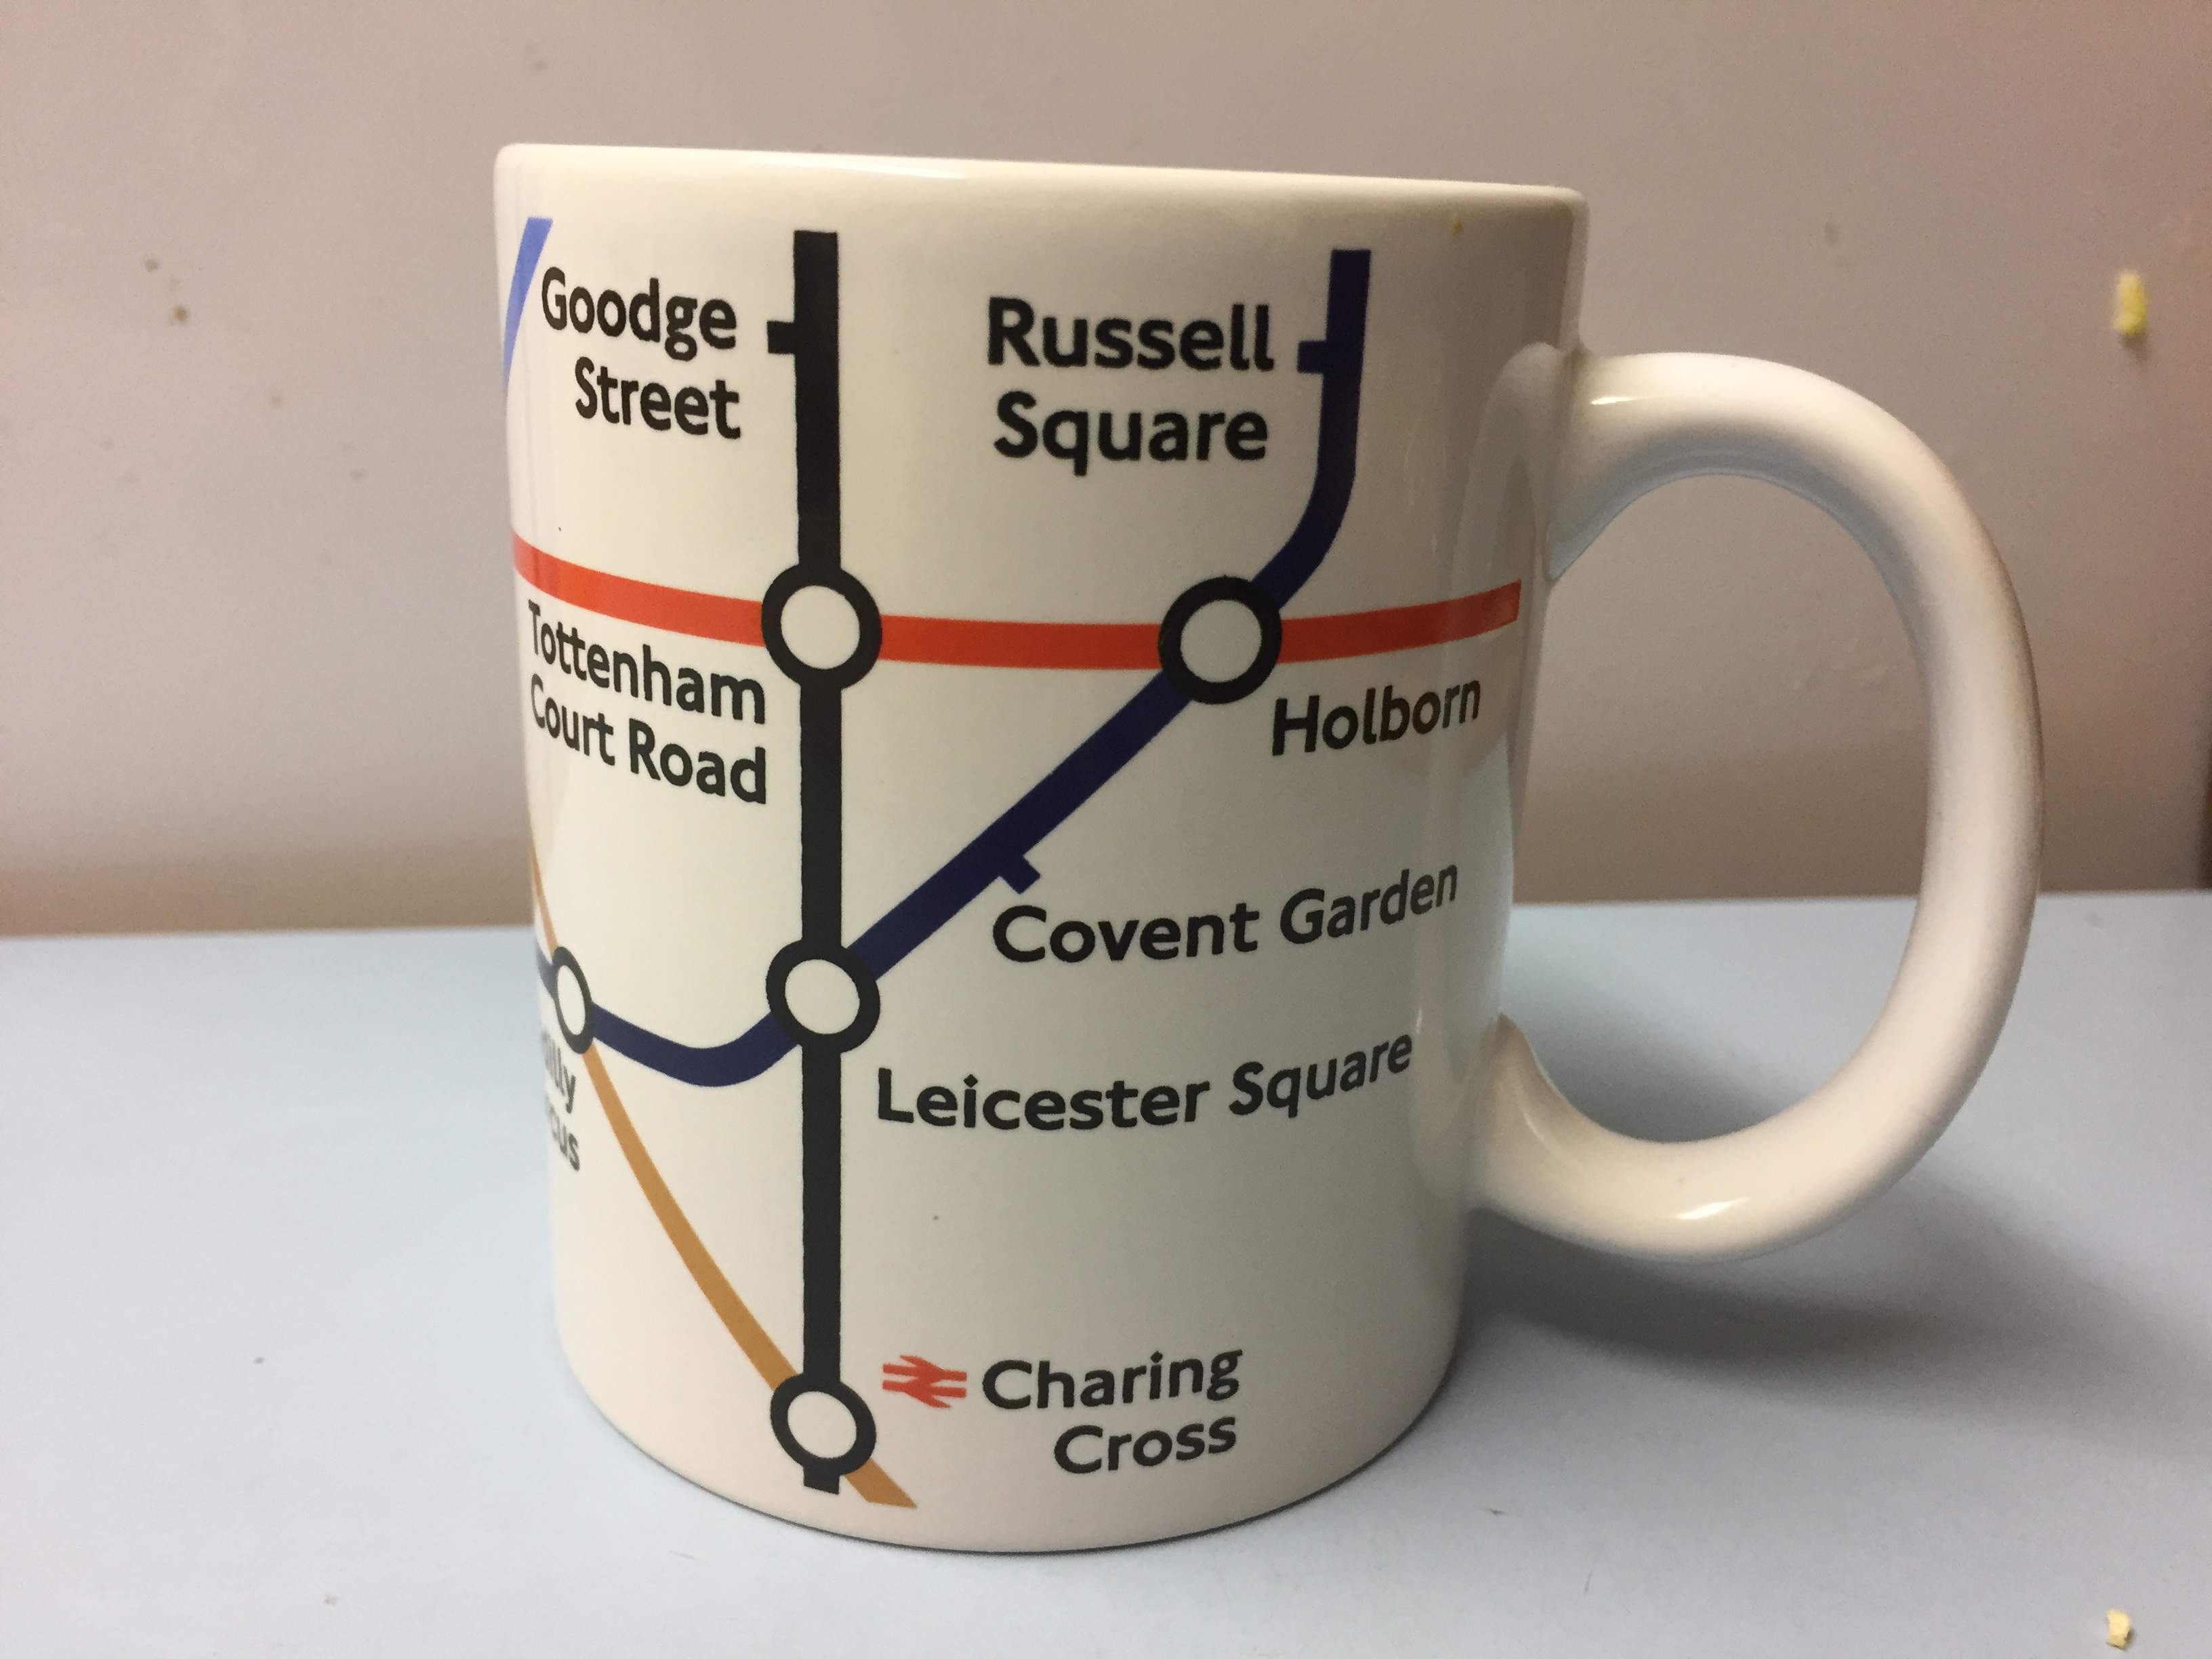 Mug featuring a section from the central part of the Tube Map. On this side of the mug you can see Goodge Street, Russell Square, Tottenham Court Road, Holborn, Covent Garden, Leicester Square & Charing Cross.